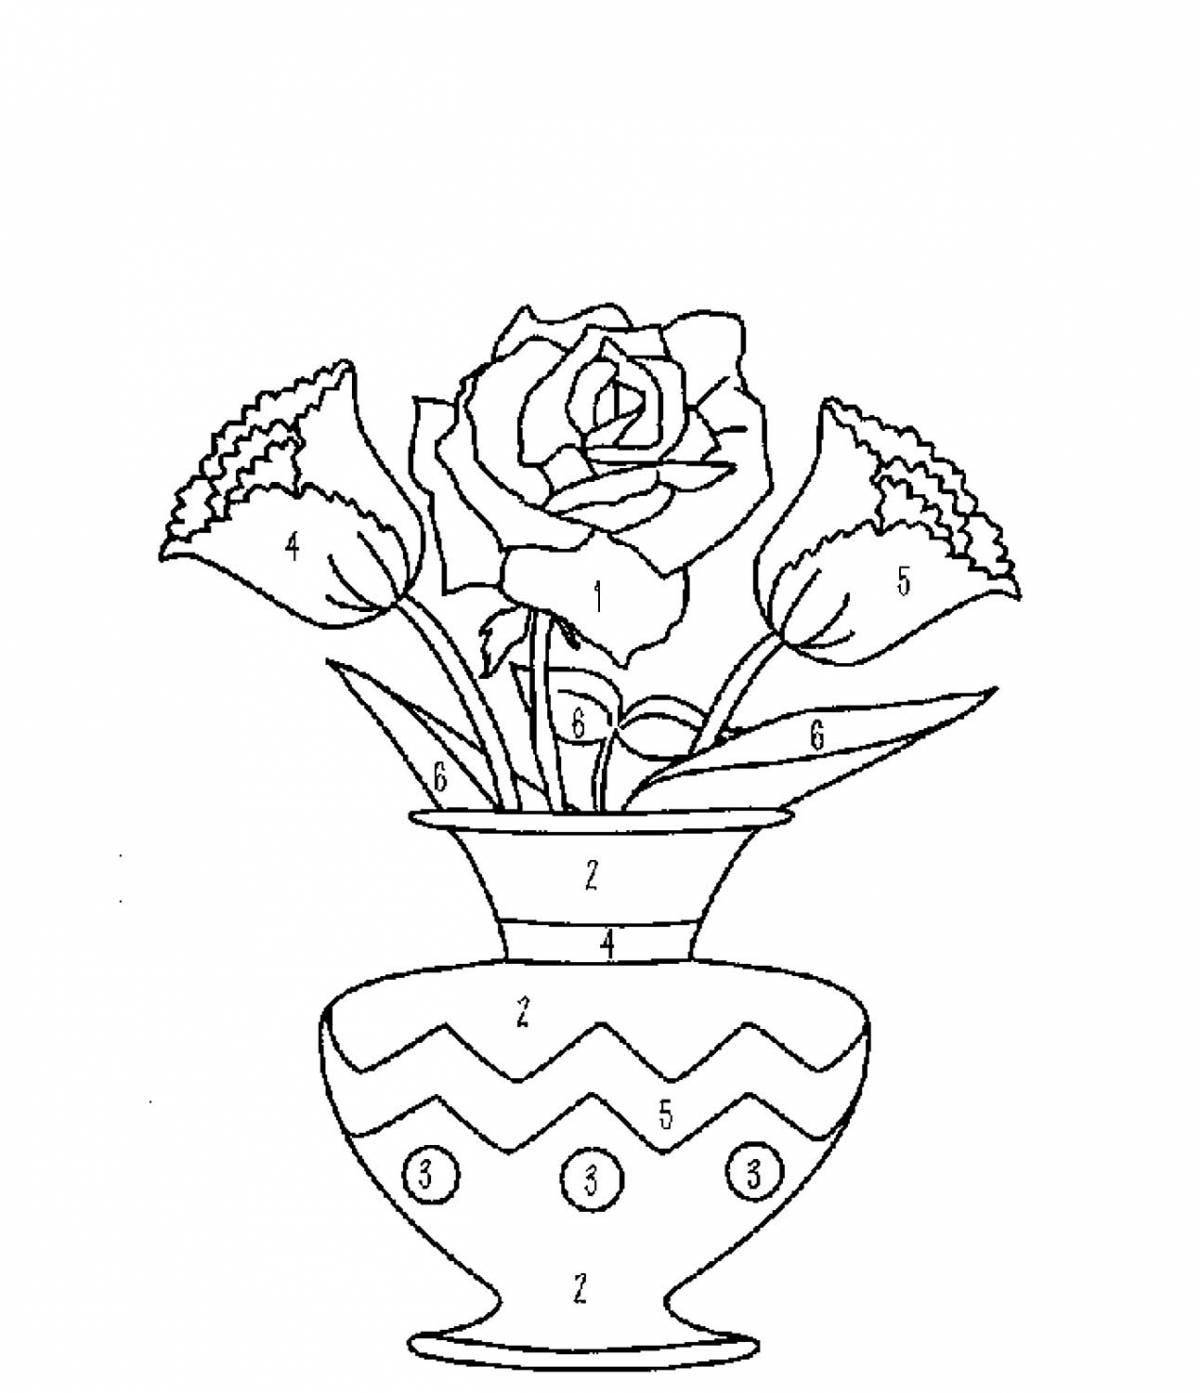 Charming vase of flowers coloring book for children